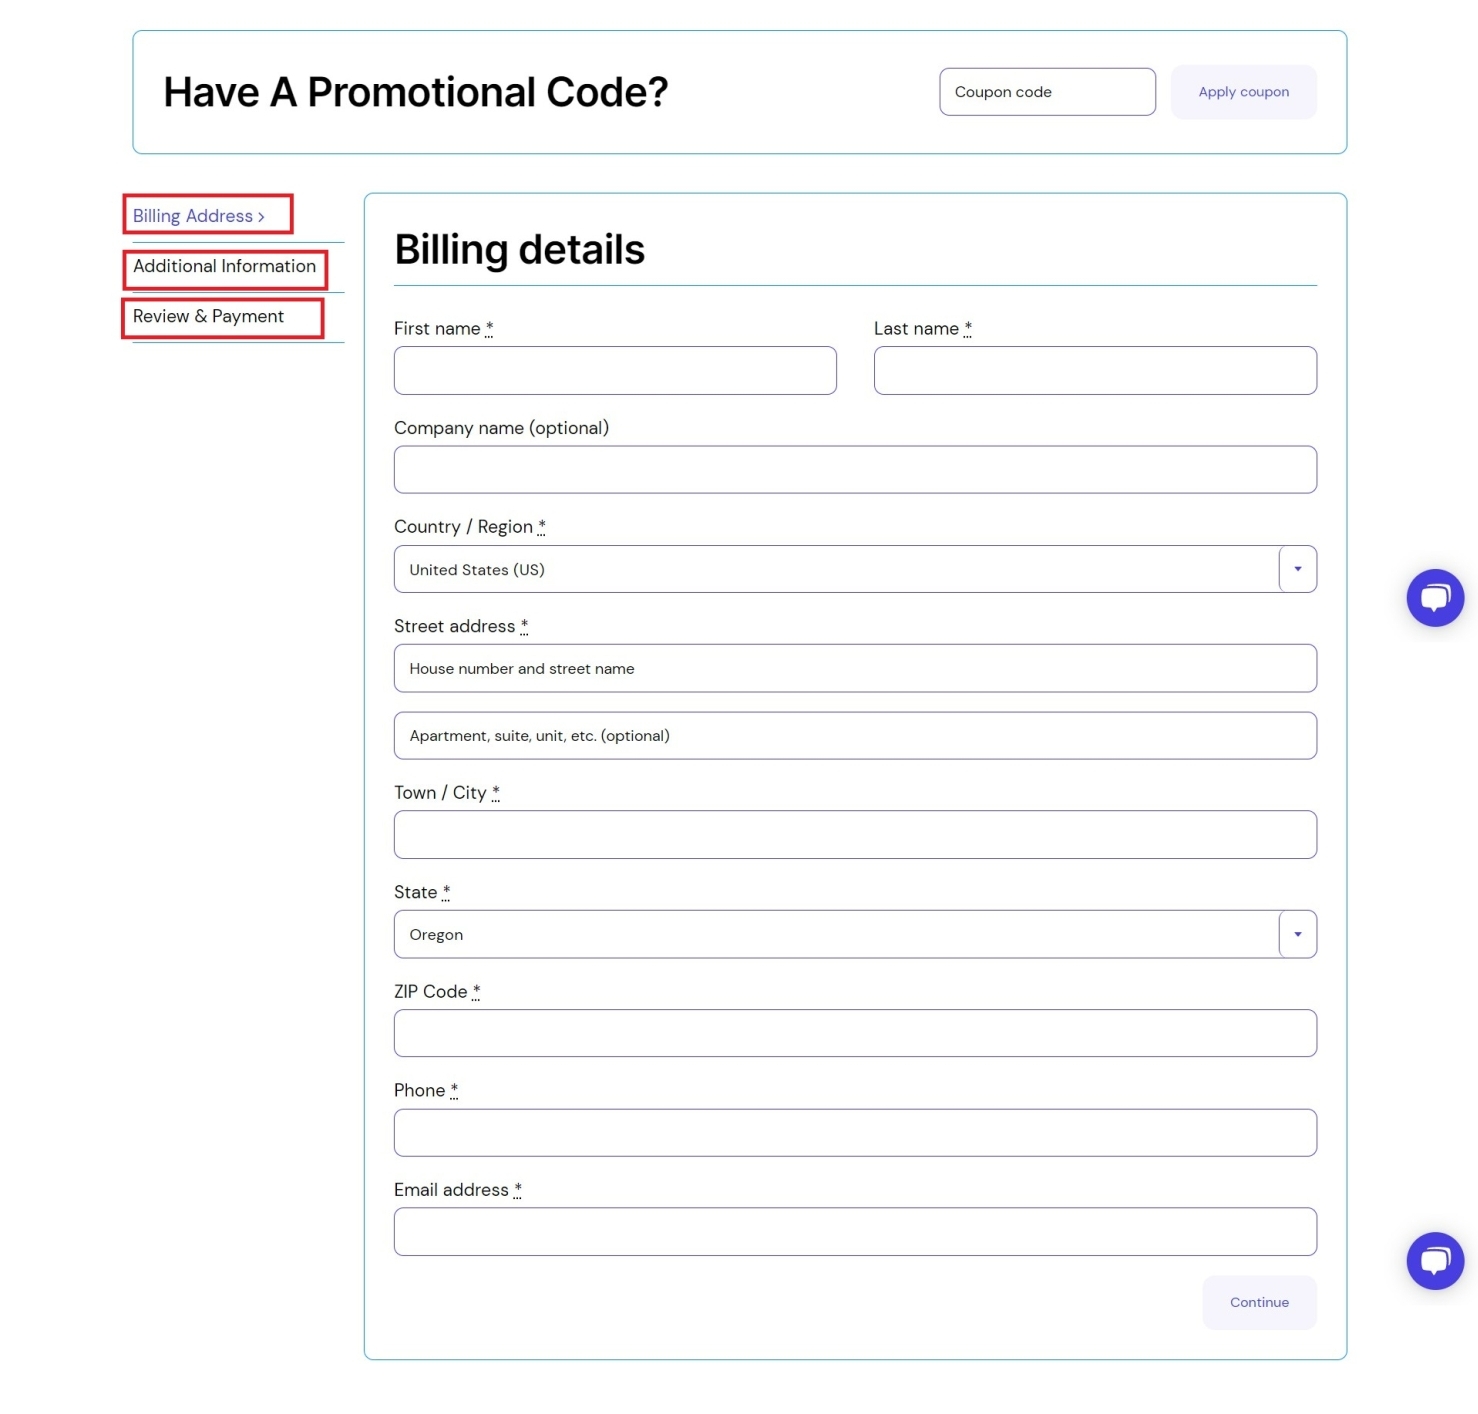 WooCommerce checkout